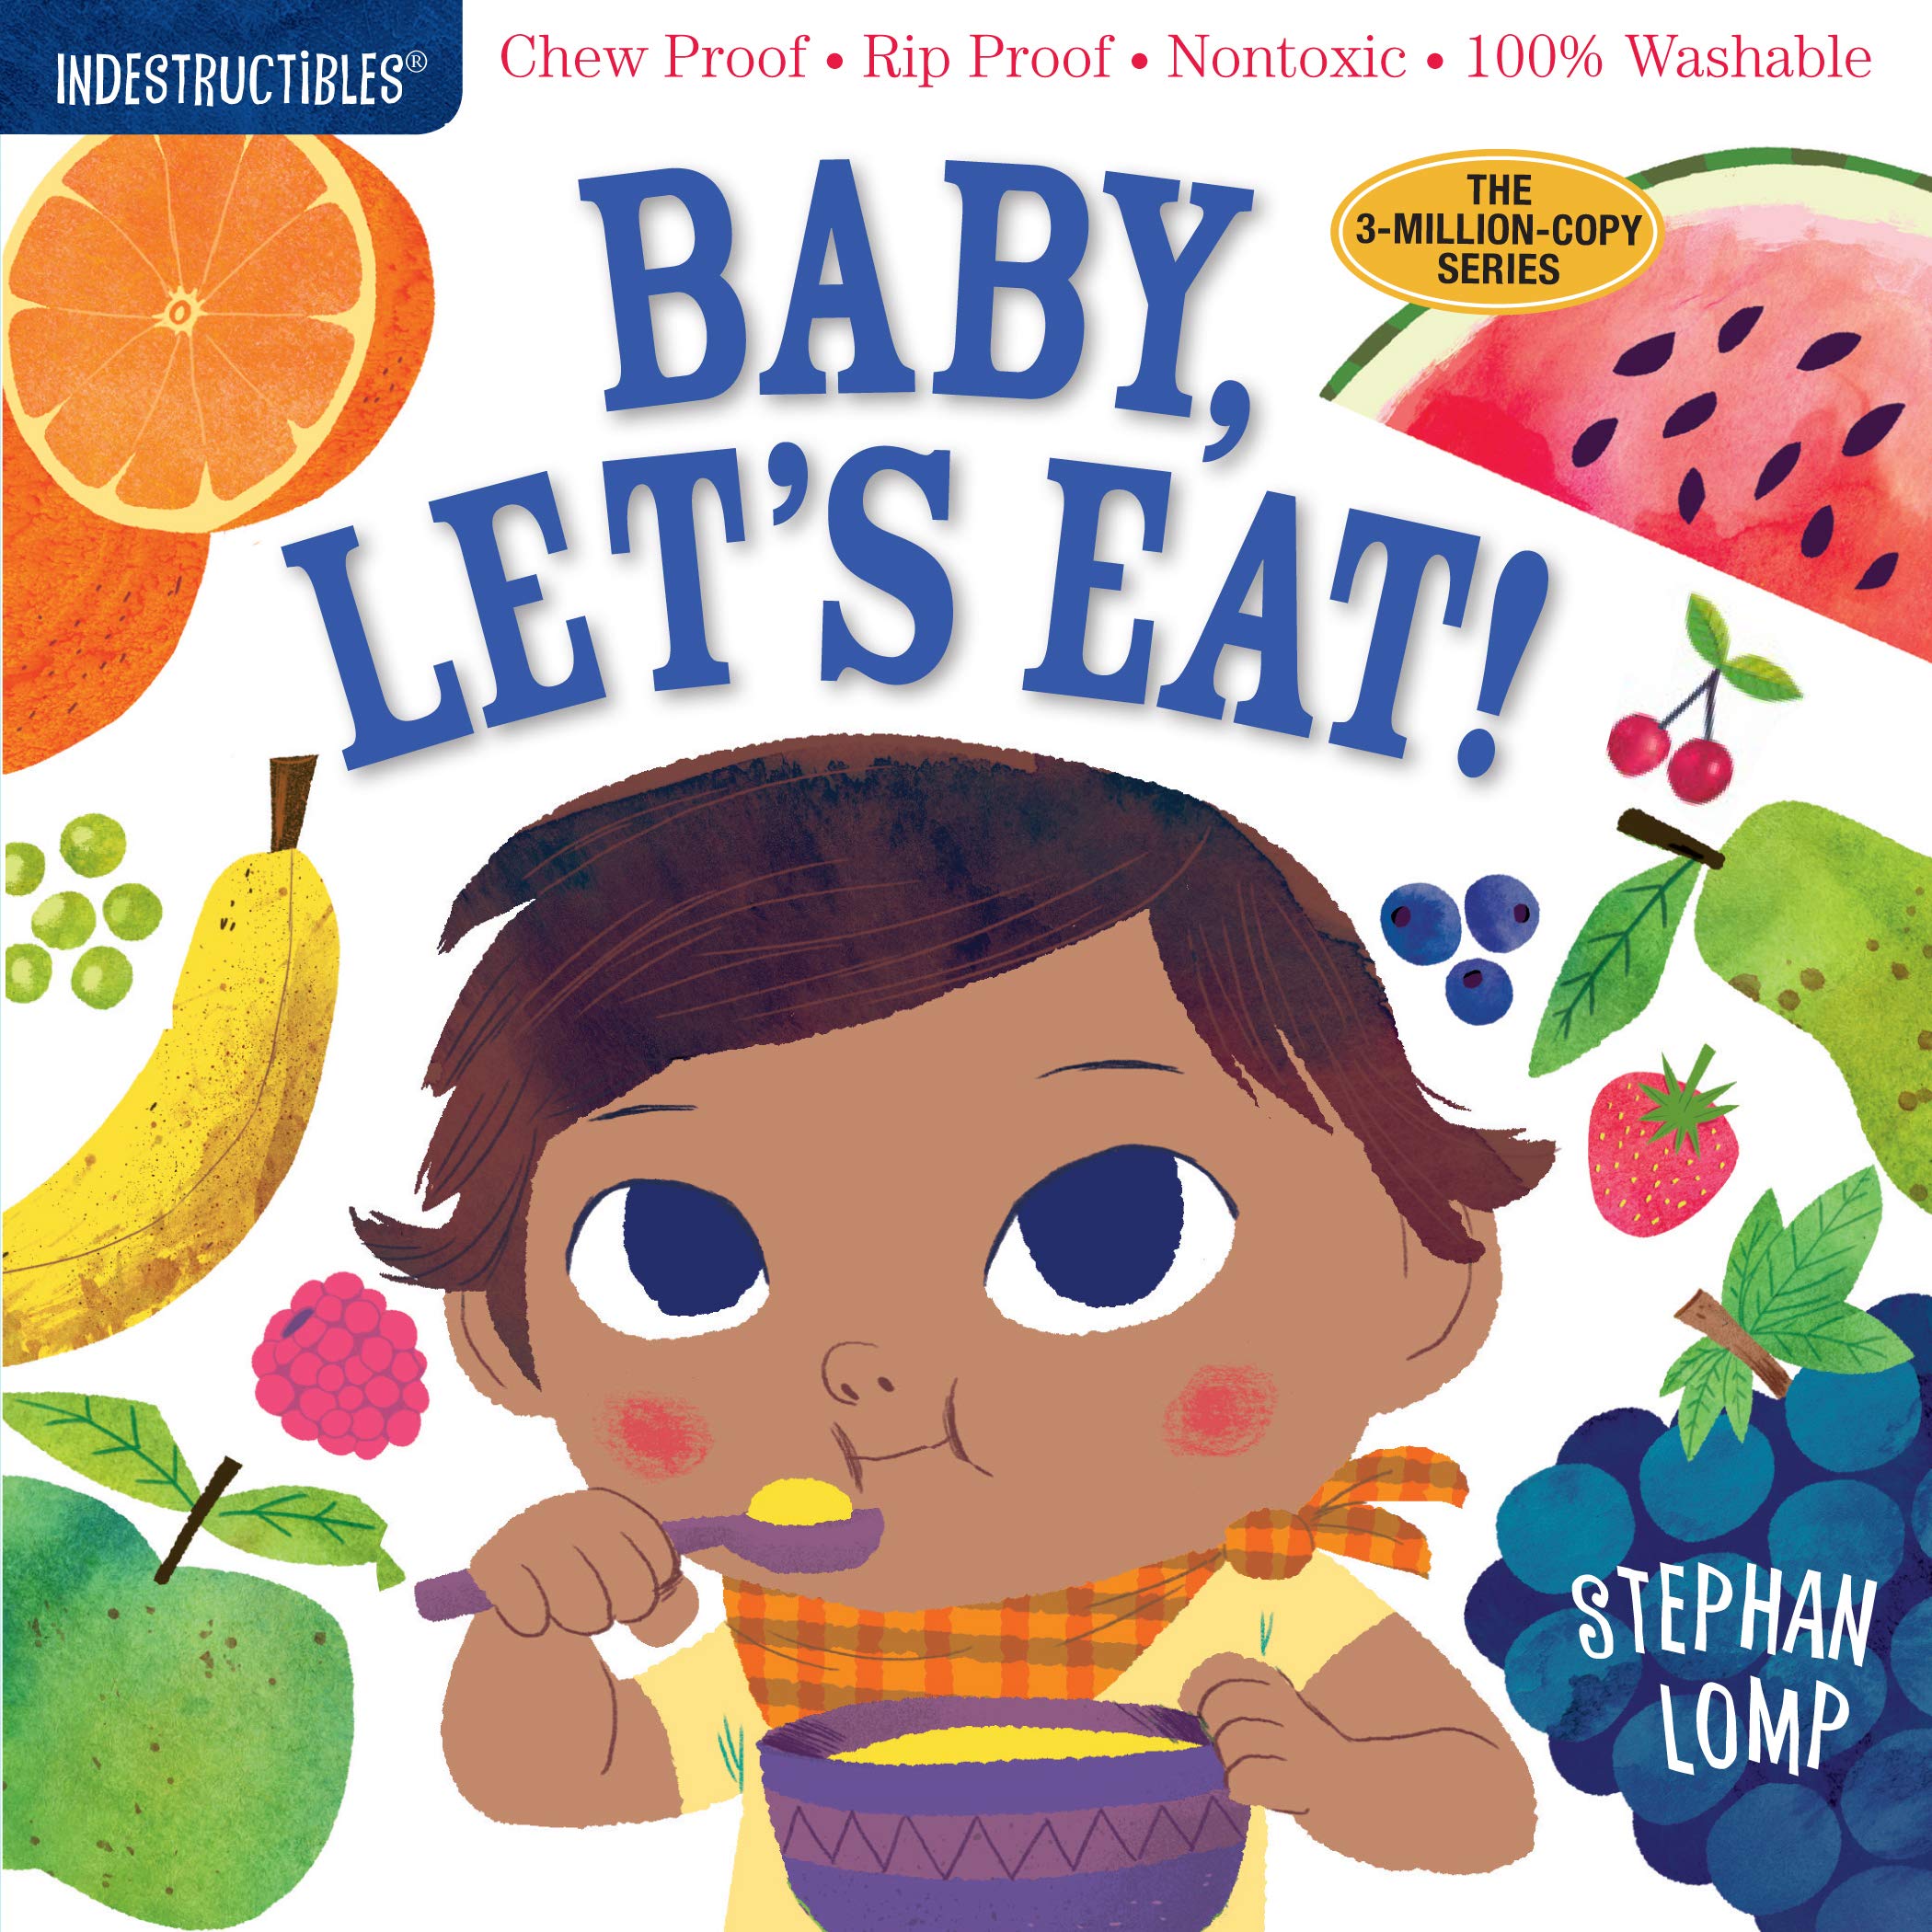 View Indestructibles: Baby, Let's Eat! by Stephan Lomp